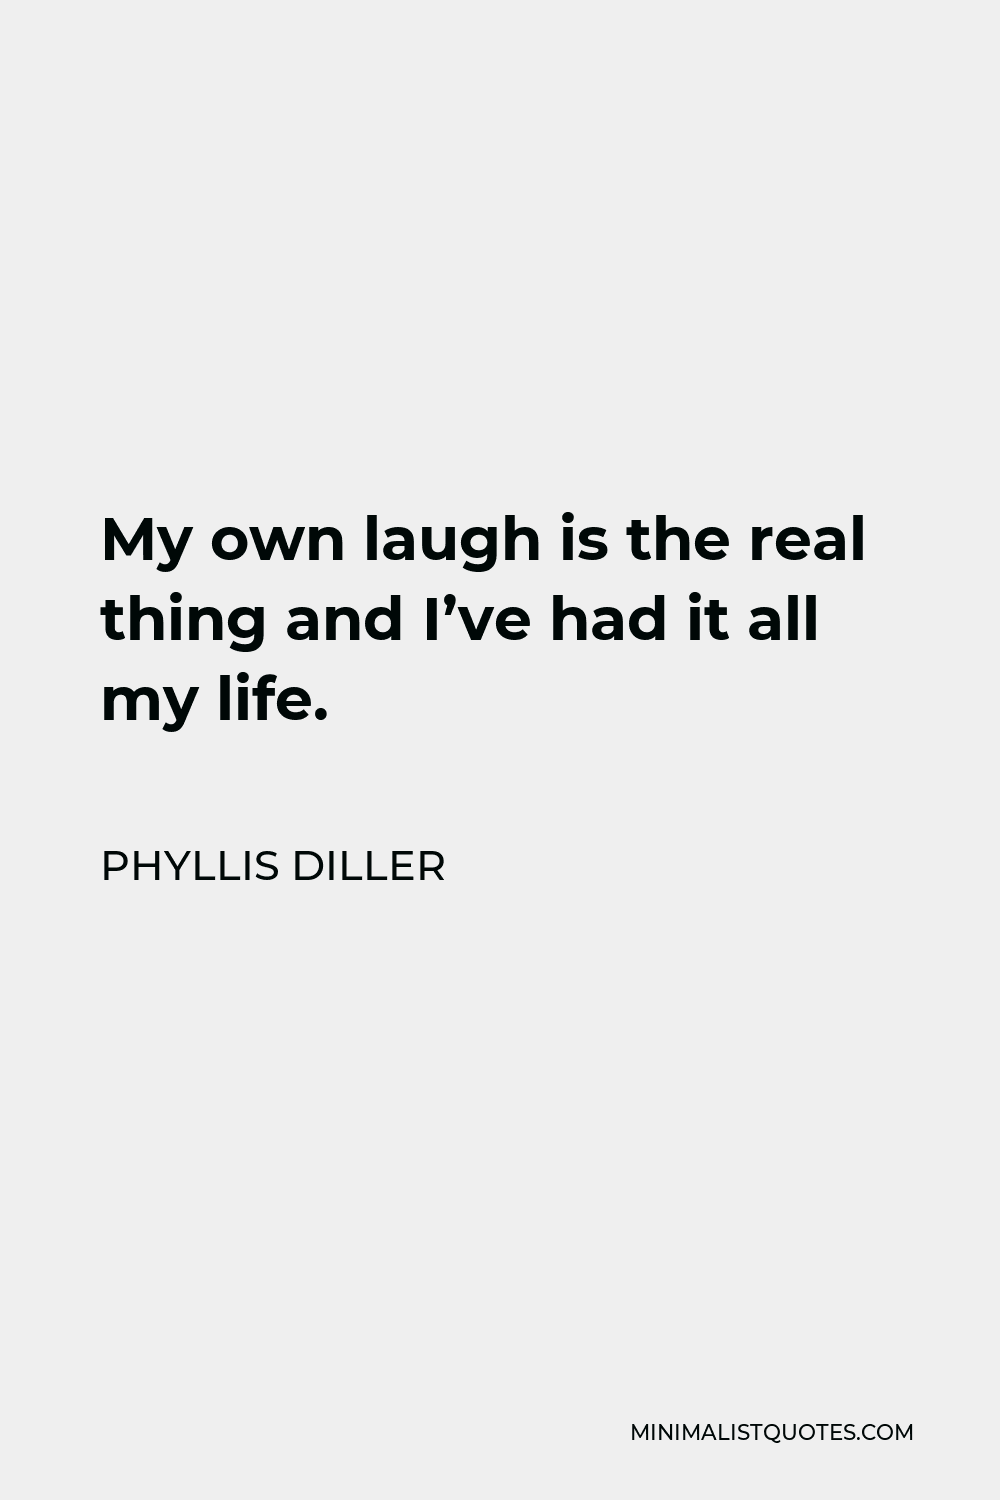 Phyllis Diller Quote - My own laugh is the real thing and I’ve had it all my life.